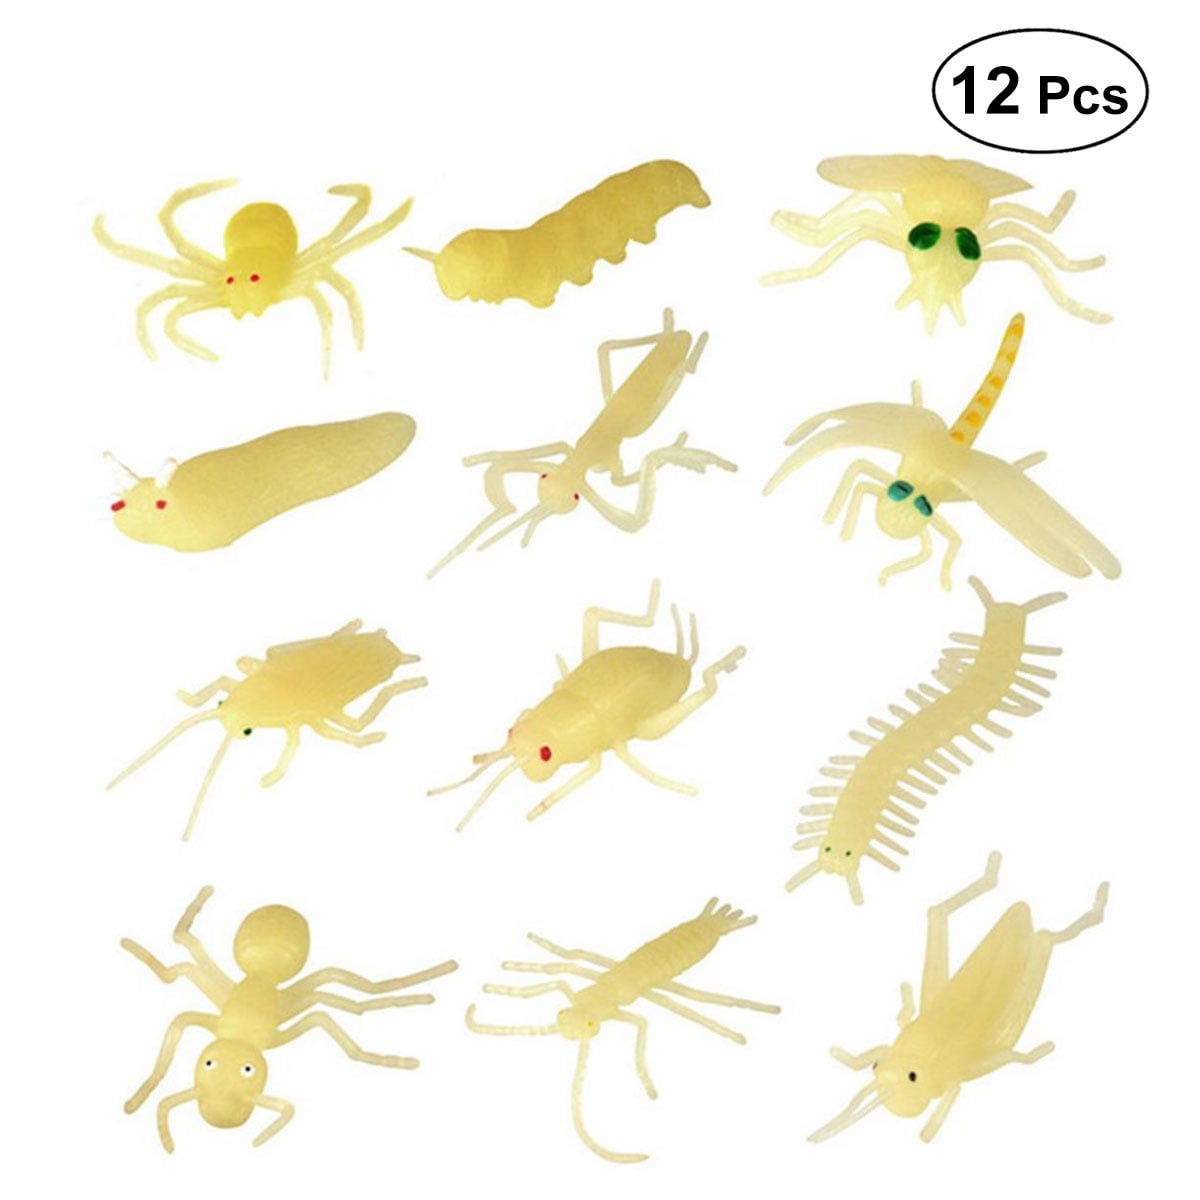 Bag of 100 Glow in the Dark Plastic Insects 